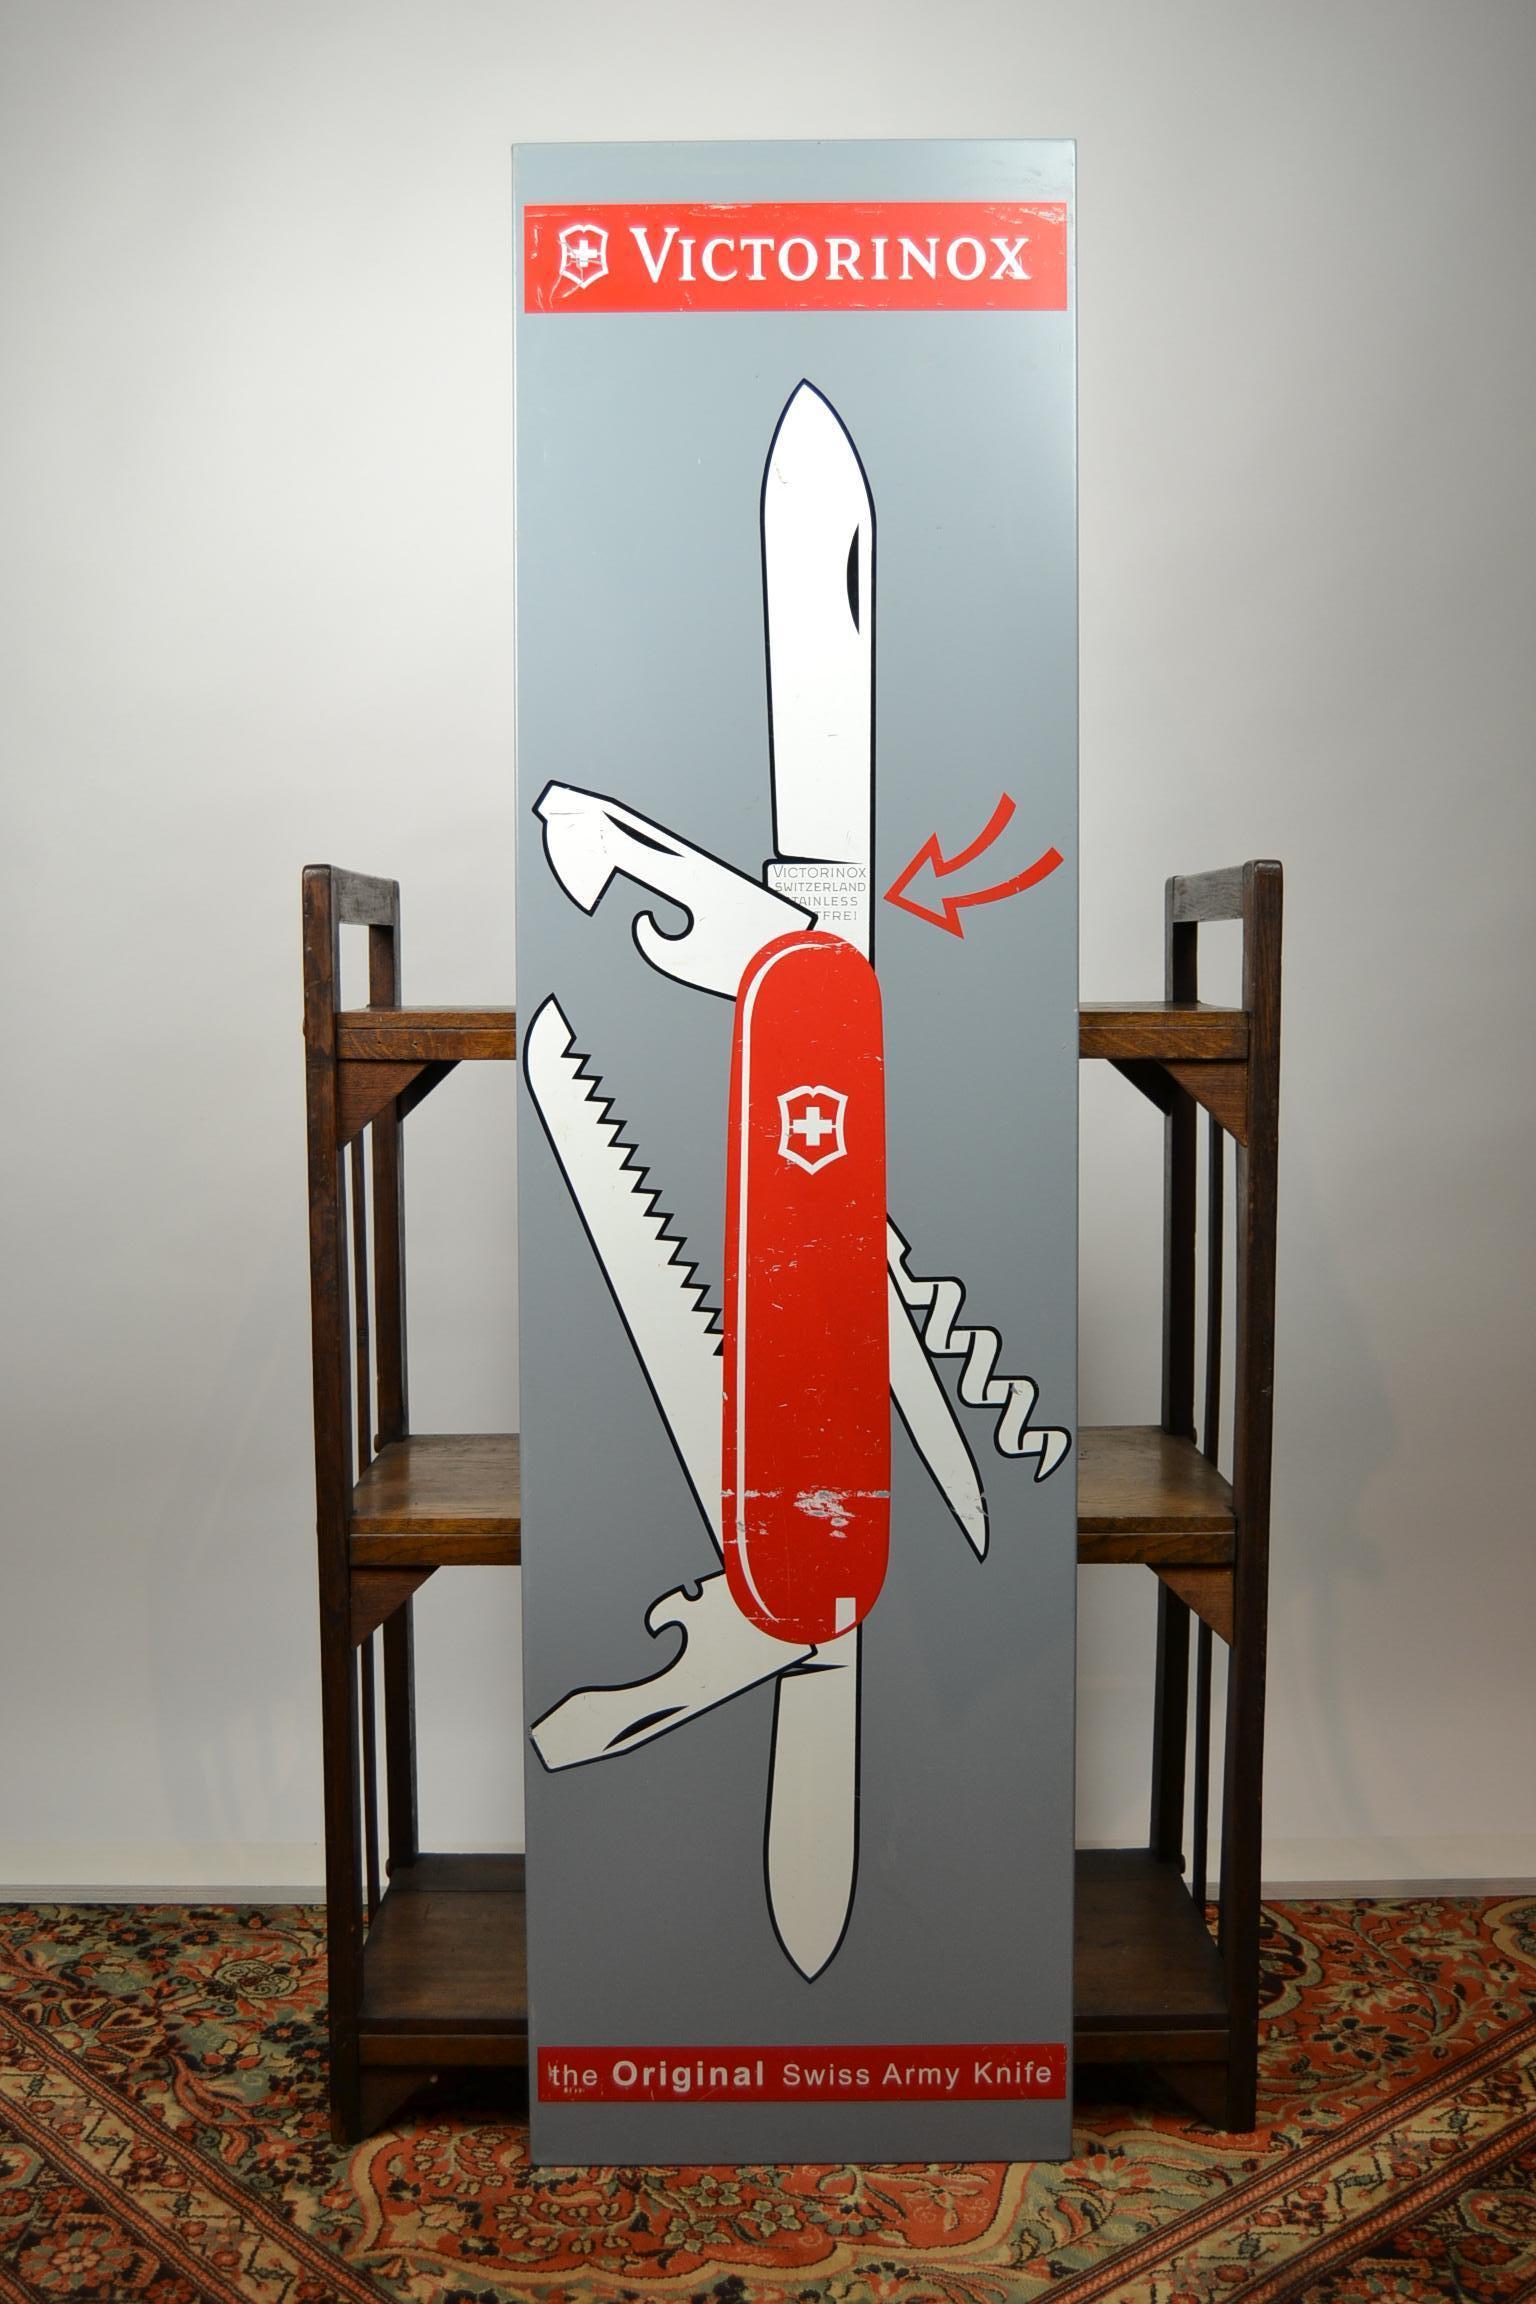 Vintage metal publicity wall sign for Victorinox - known for its Swiss Army knives.

The company was founded in 1884. Since 1891, the company has delivered knives to the Swiss army. Their emblem / logo is a cross in a shield and has been used by